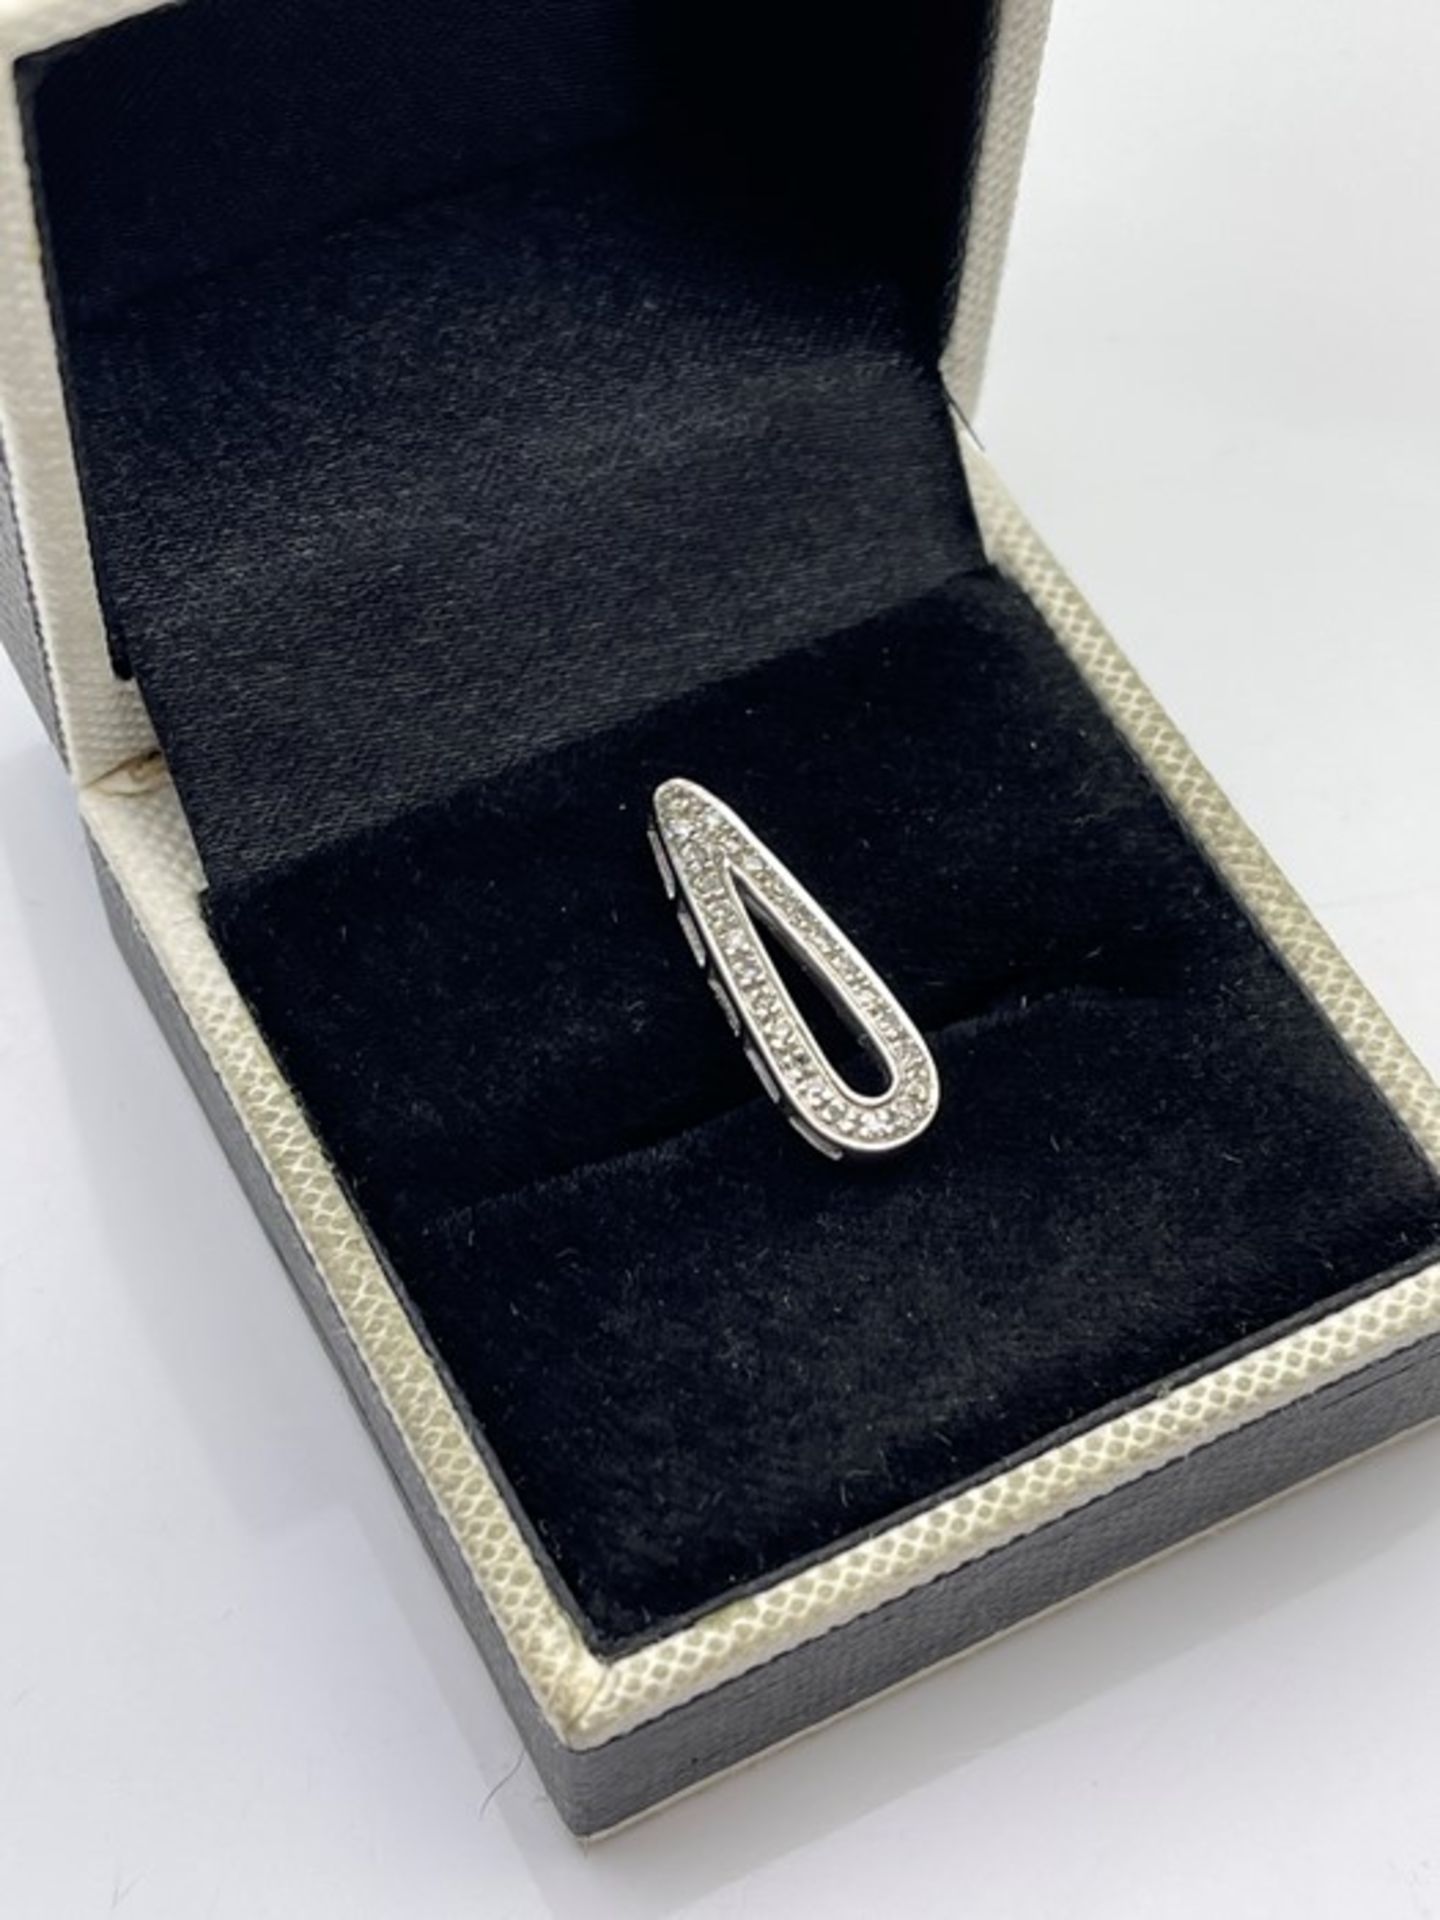 ***£550.00*** 9CT WHITE GOLD DIAMOND PENDENT, D/VS, INCLUDES GIE INSURANCE VALUATION-£550.00 (154)